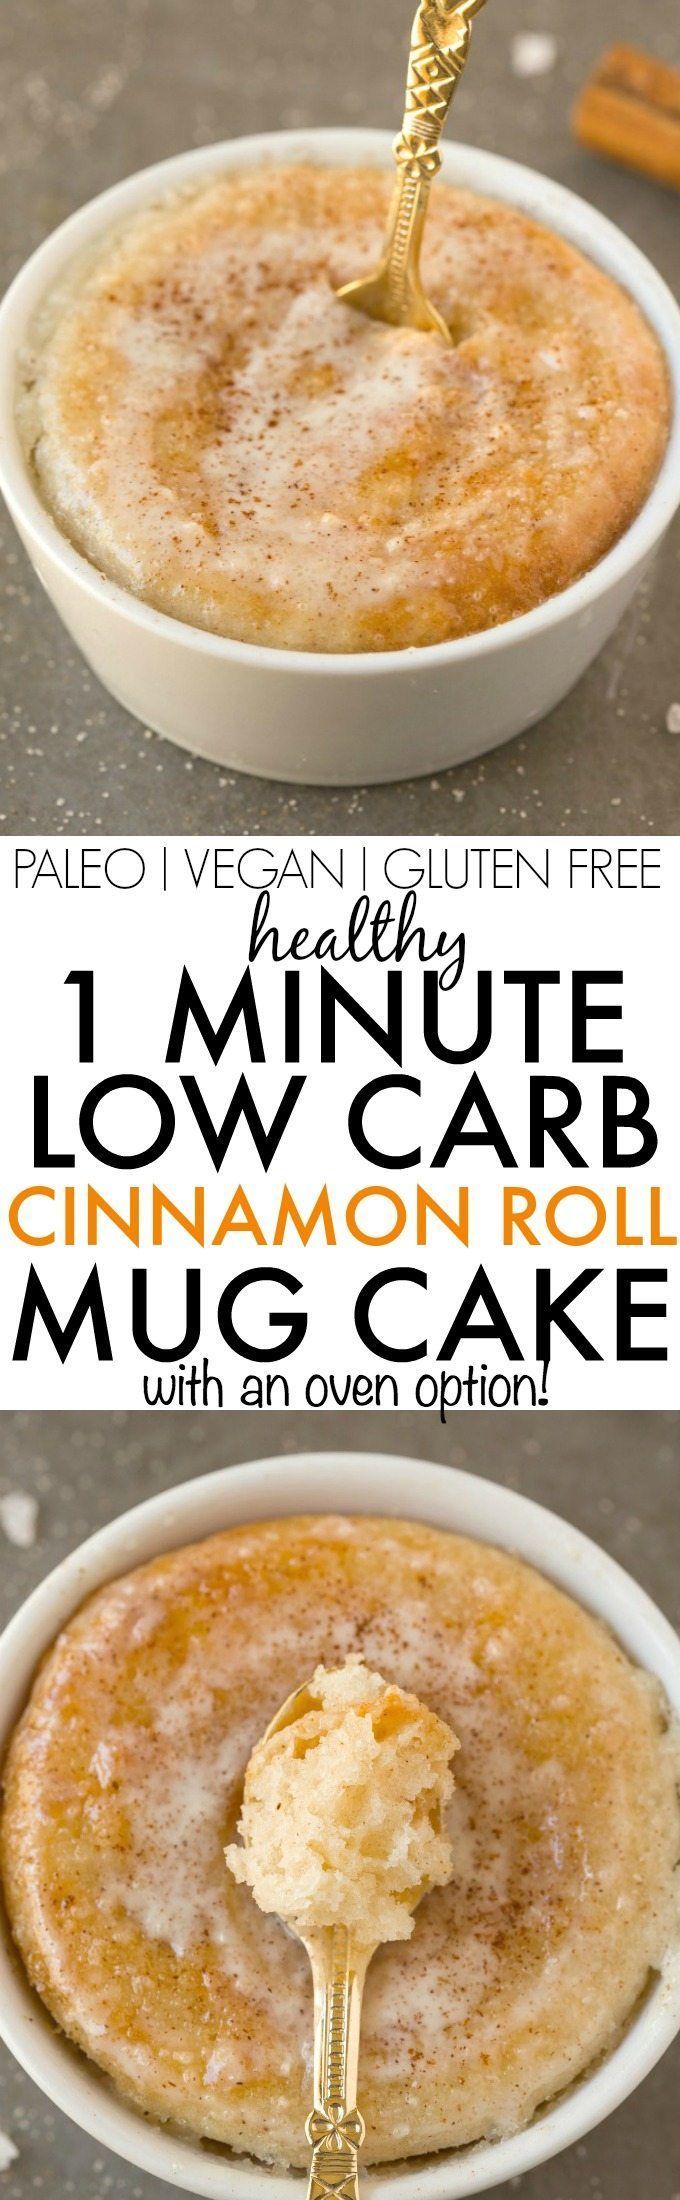 Healthy 1 Minute LOW CARB Cinnamon Roll Mug Cake- Light, fluffy and moist in the…